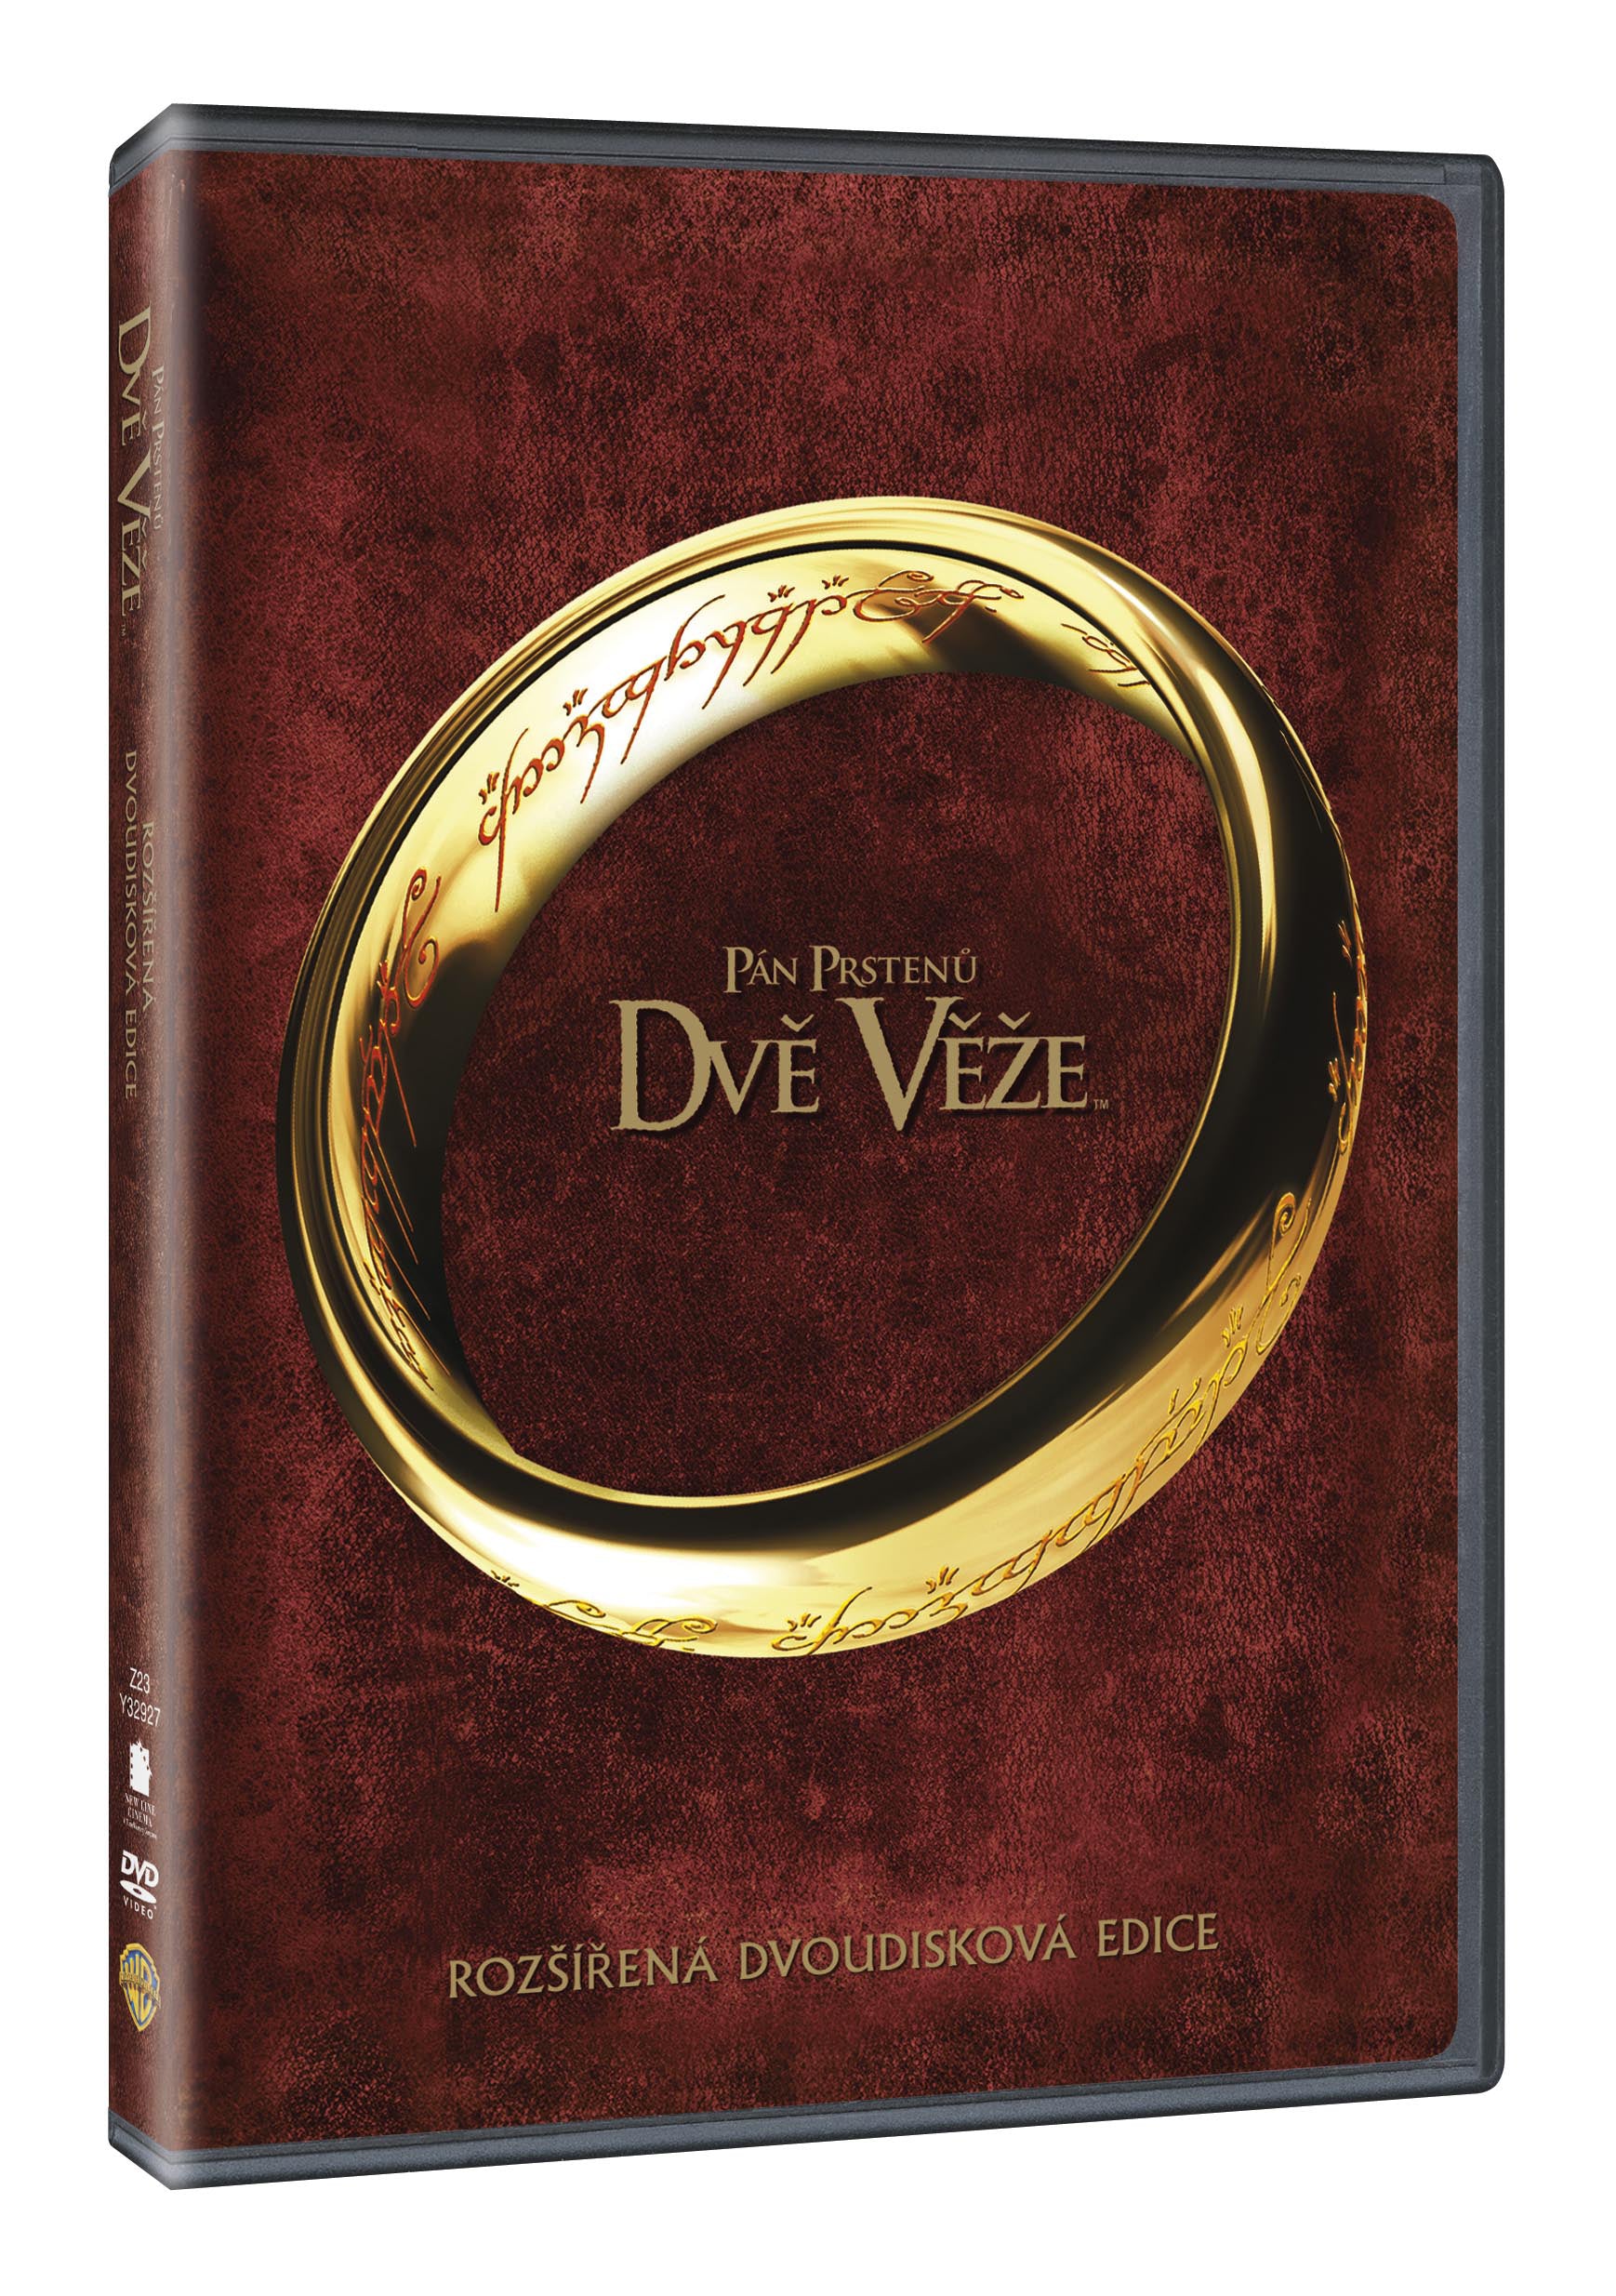 Gezeigt wird: Dve veze-rozsirena edice 2DVD / Lord of the Rings: Two Towers-Extended Edition 2DVD